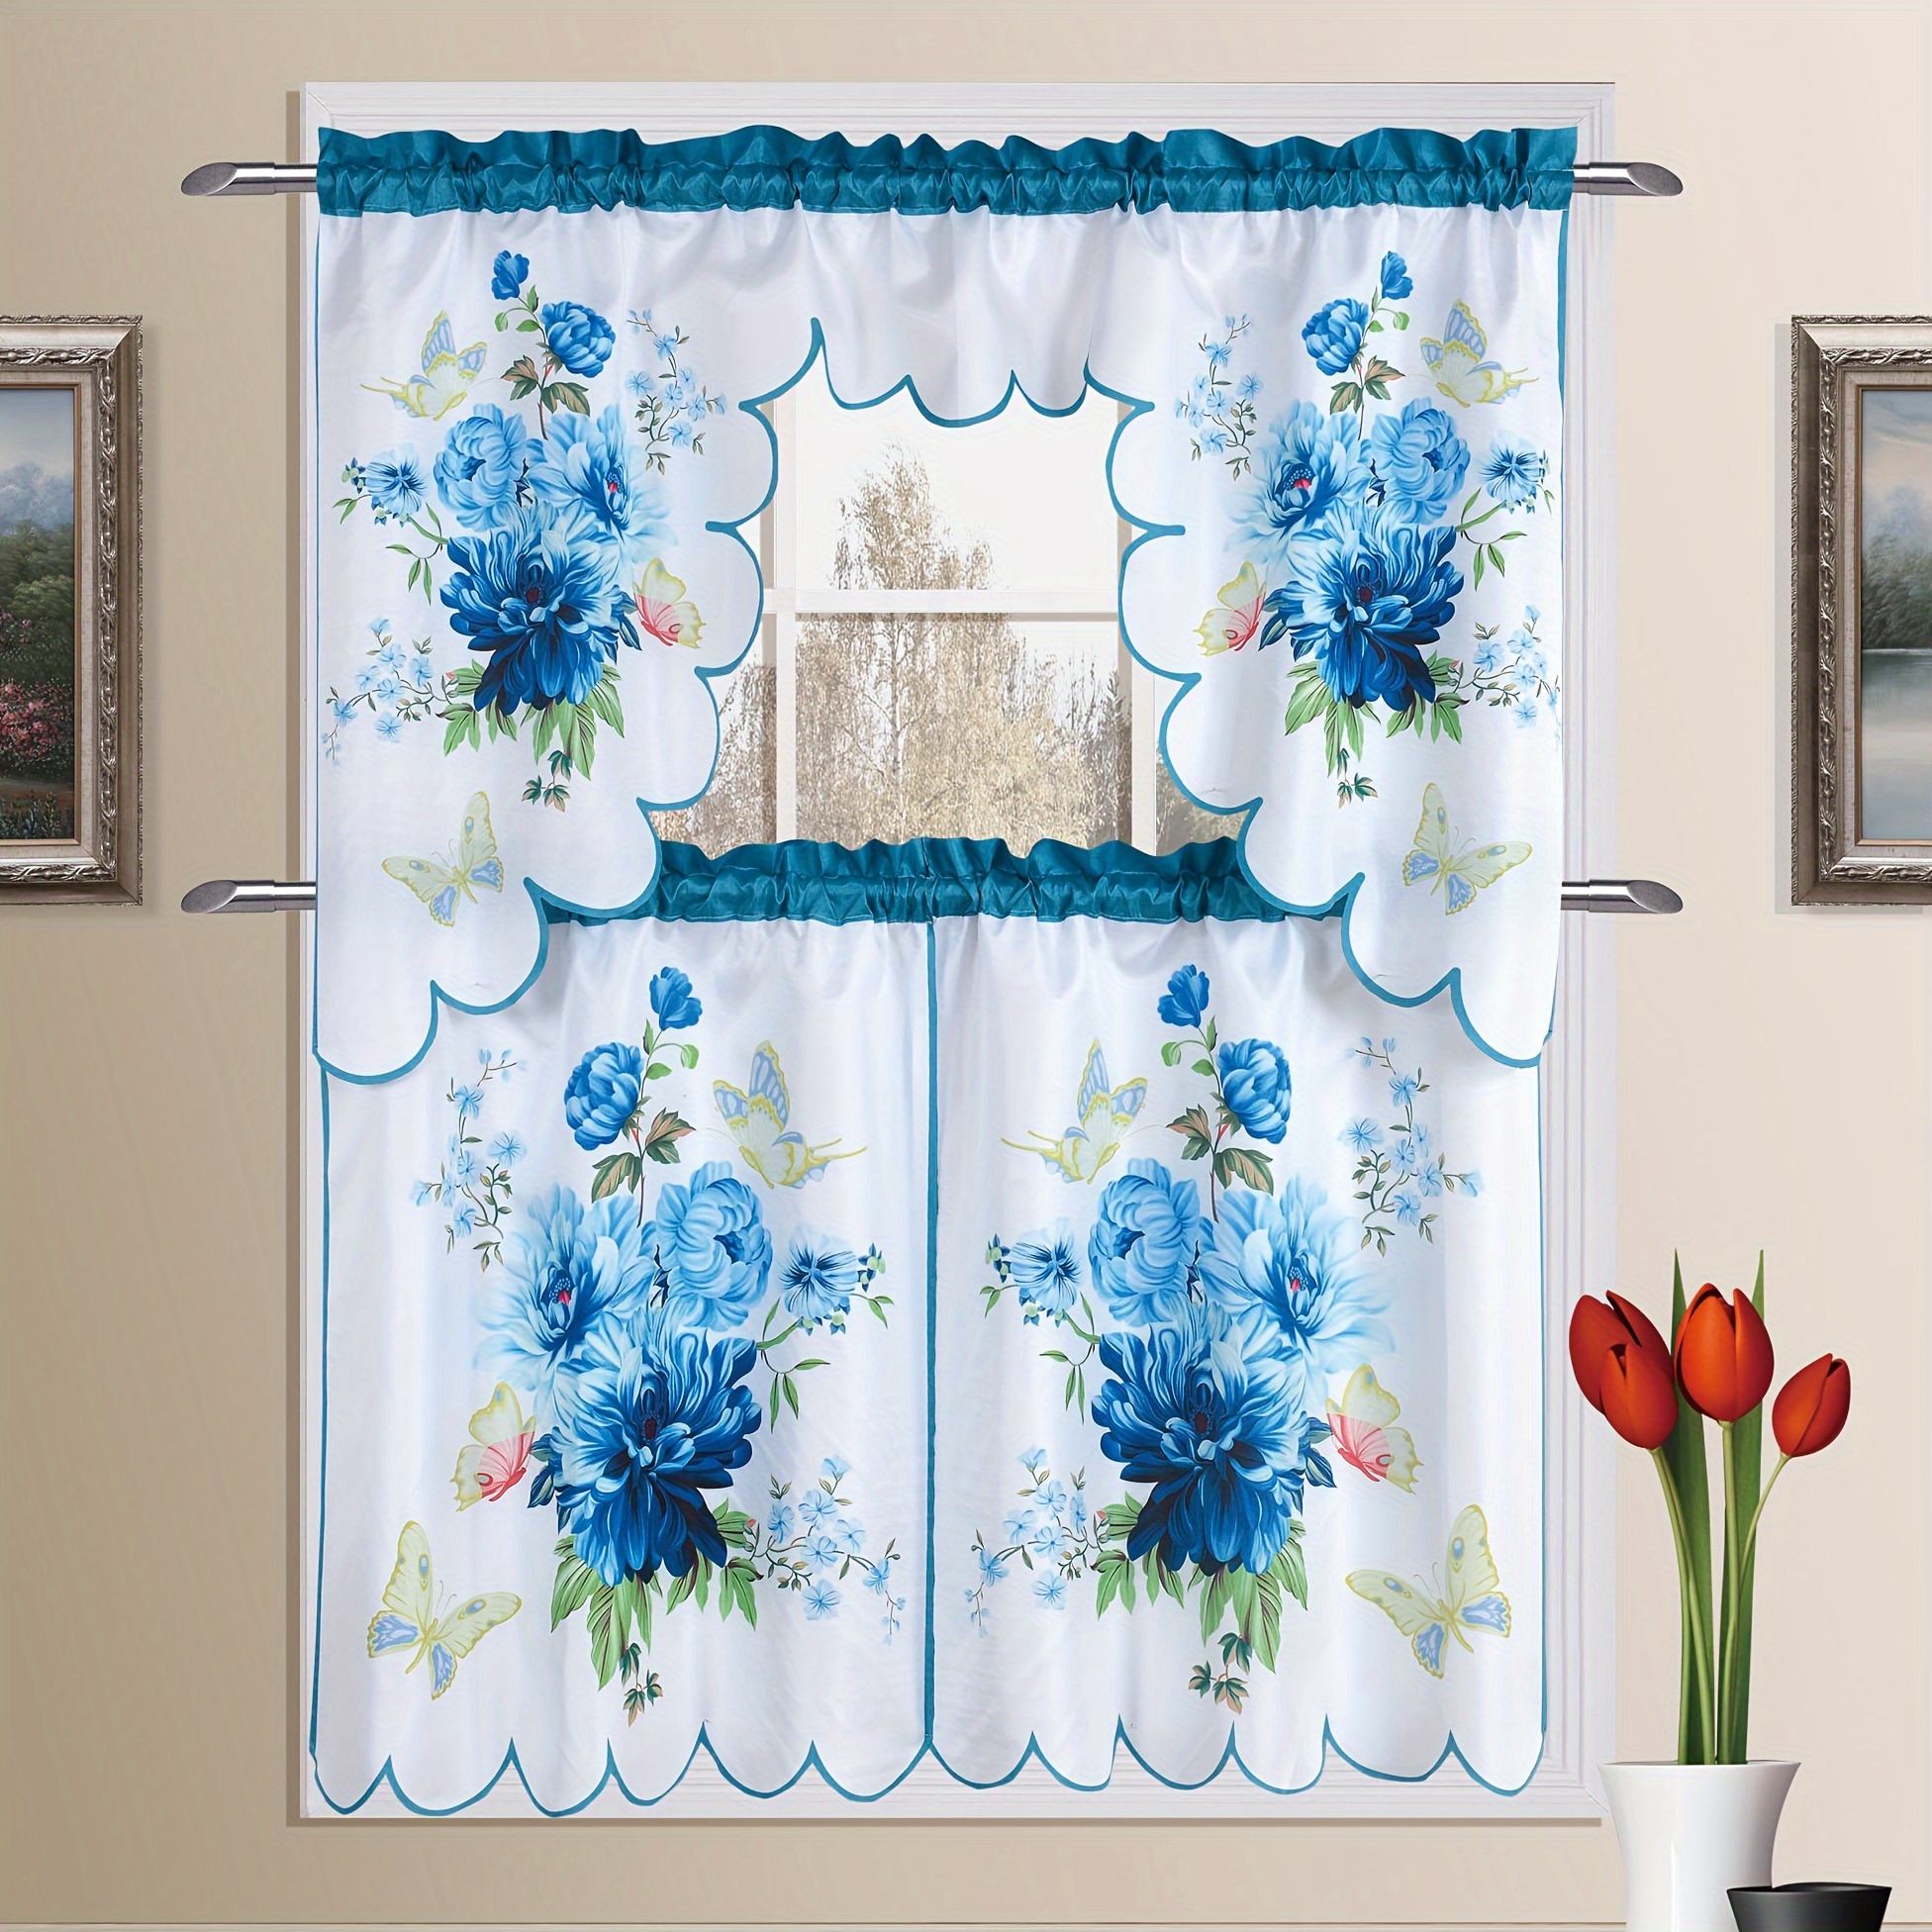 

3pcs/set Floral Prints Small Curtain Tiers, Light-blocking Tiered Cafe Curtain Valance, Decorative Short Window Drapes For Party, Gifts, Kitchen, Office, Bedroom, Home Decoration